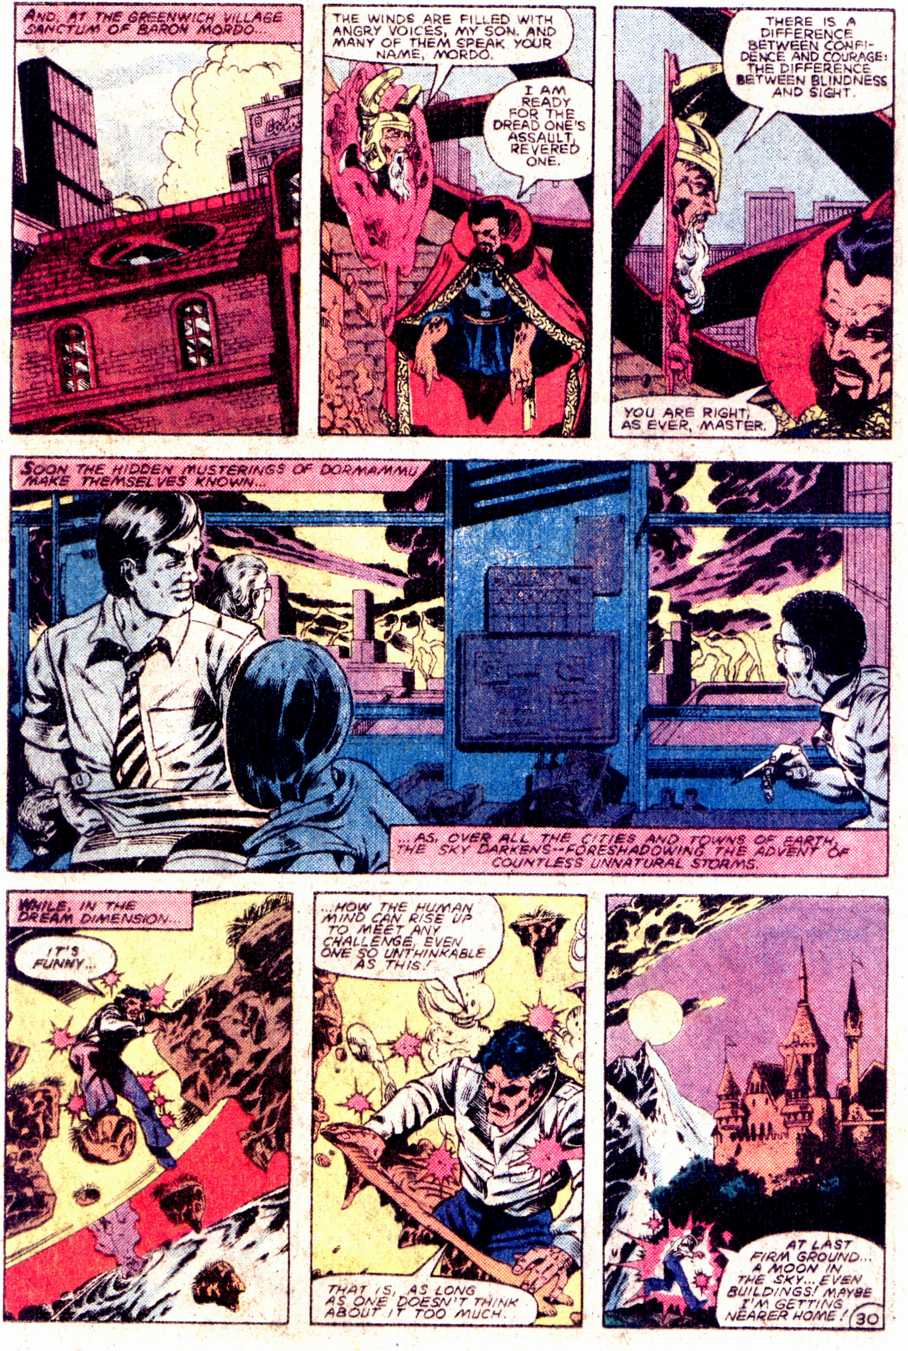 What If? (1977) issue 40 - Dr Strange had not become master of The mystic arts - Page 31